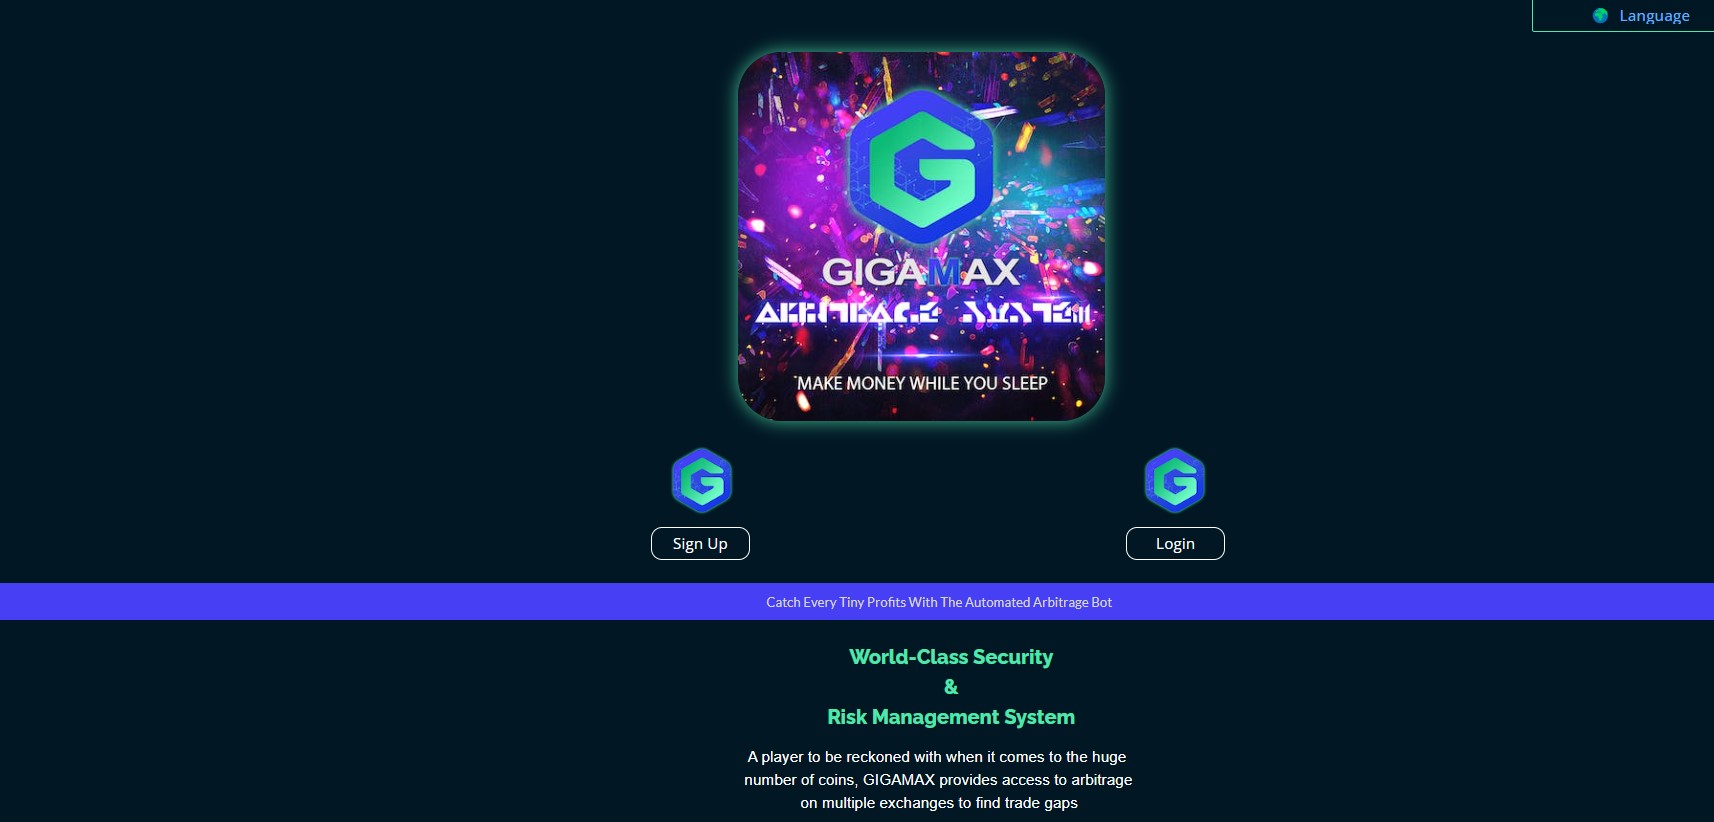 Gigamax Review: Is Gigamax a Legitimate Broker or a Scam?